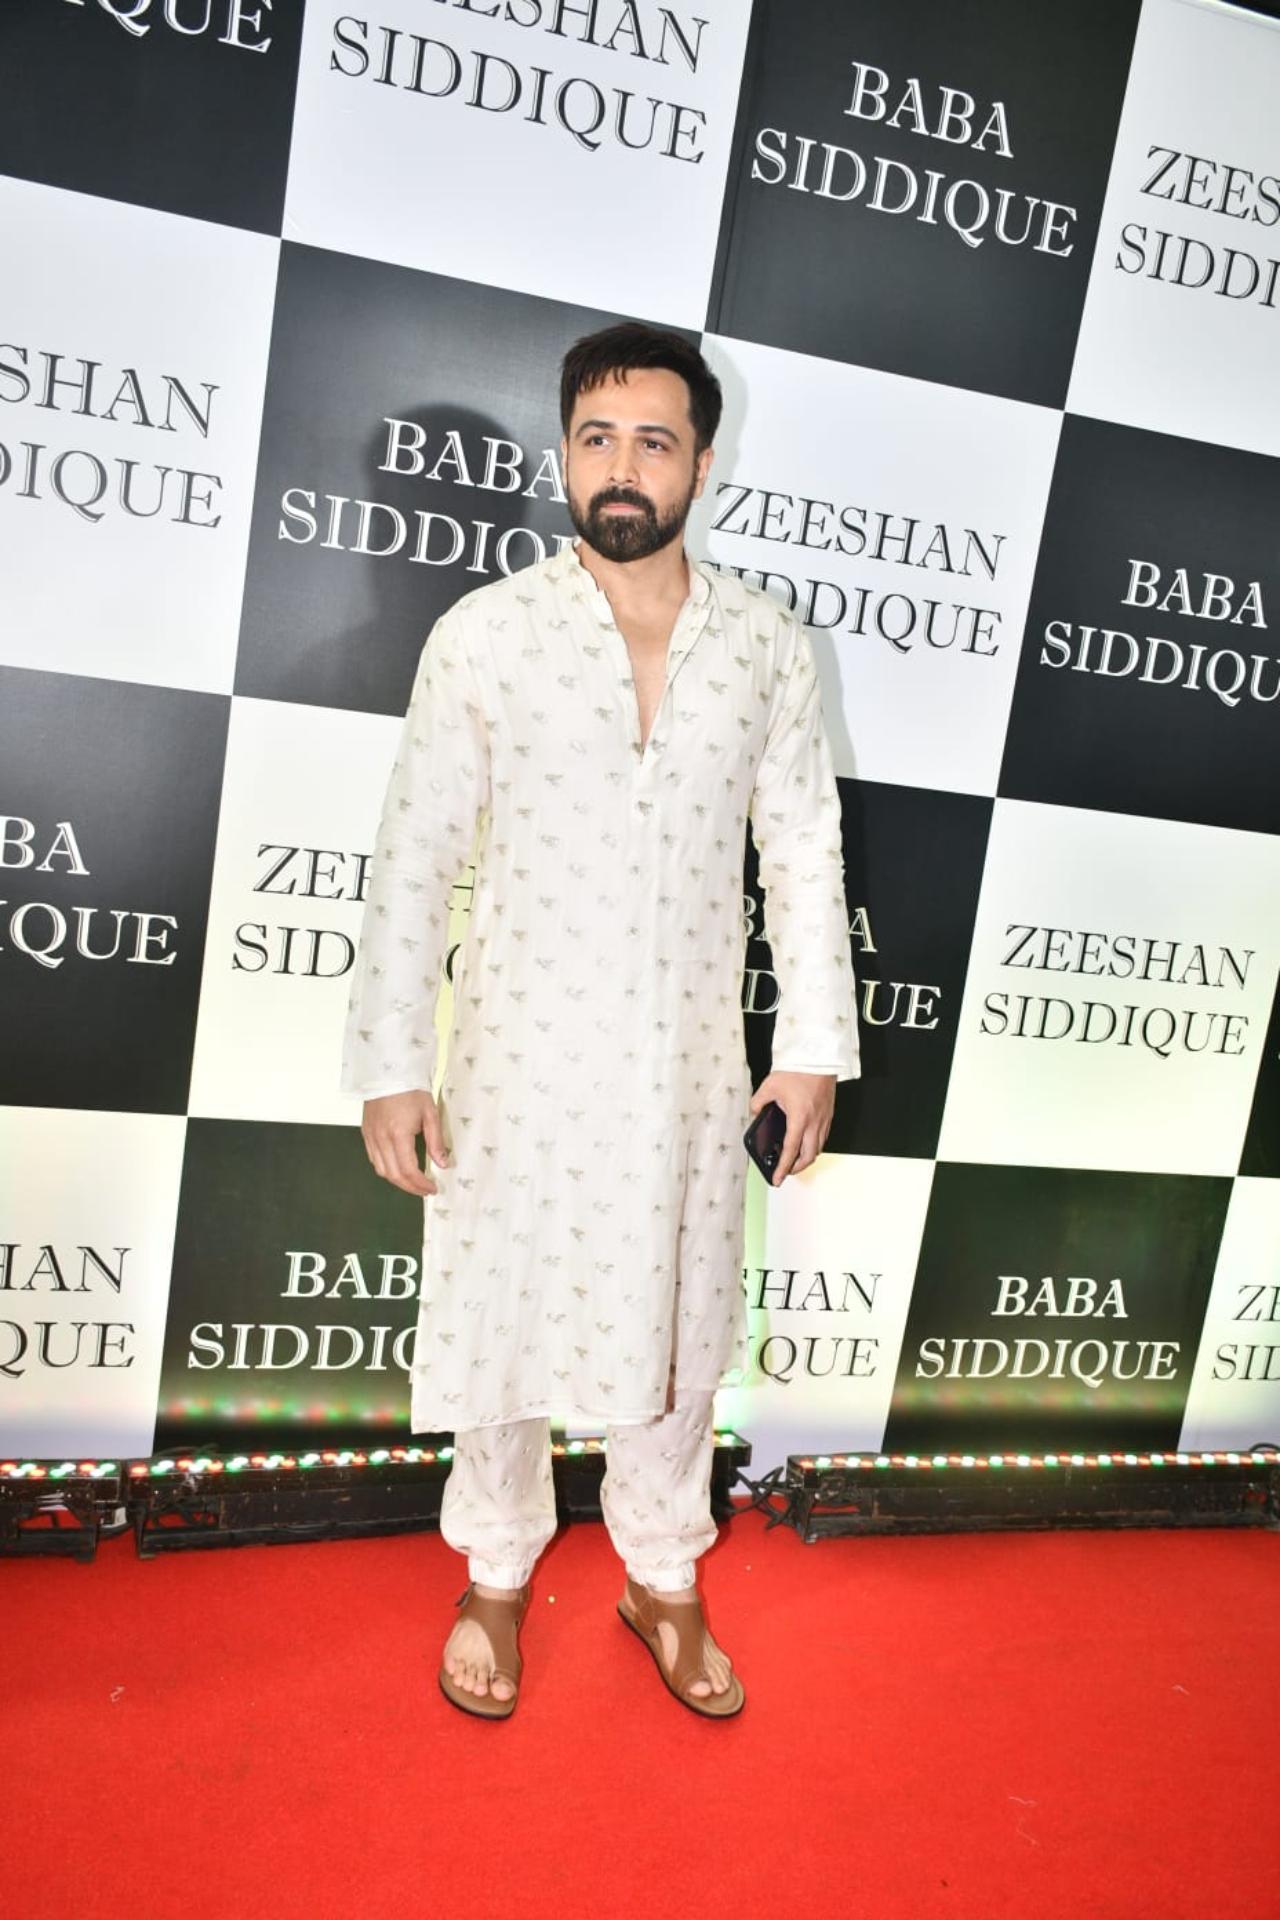 Emraan Hashmi was seen at the party arriving solo dressed in an all-white kurta 